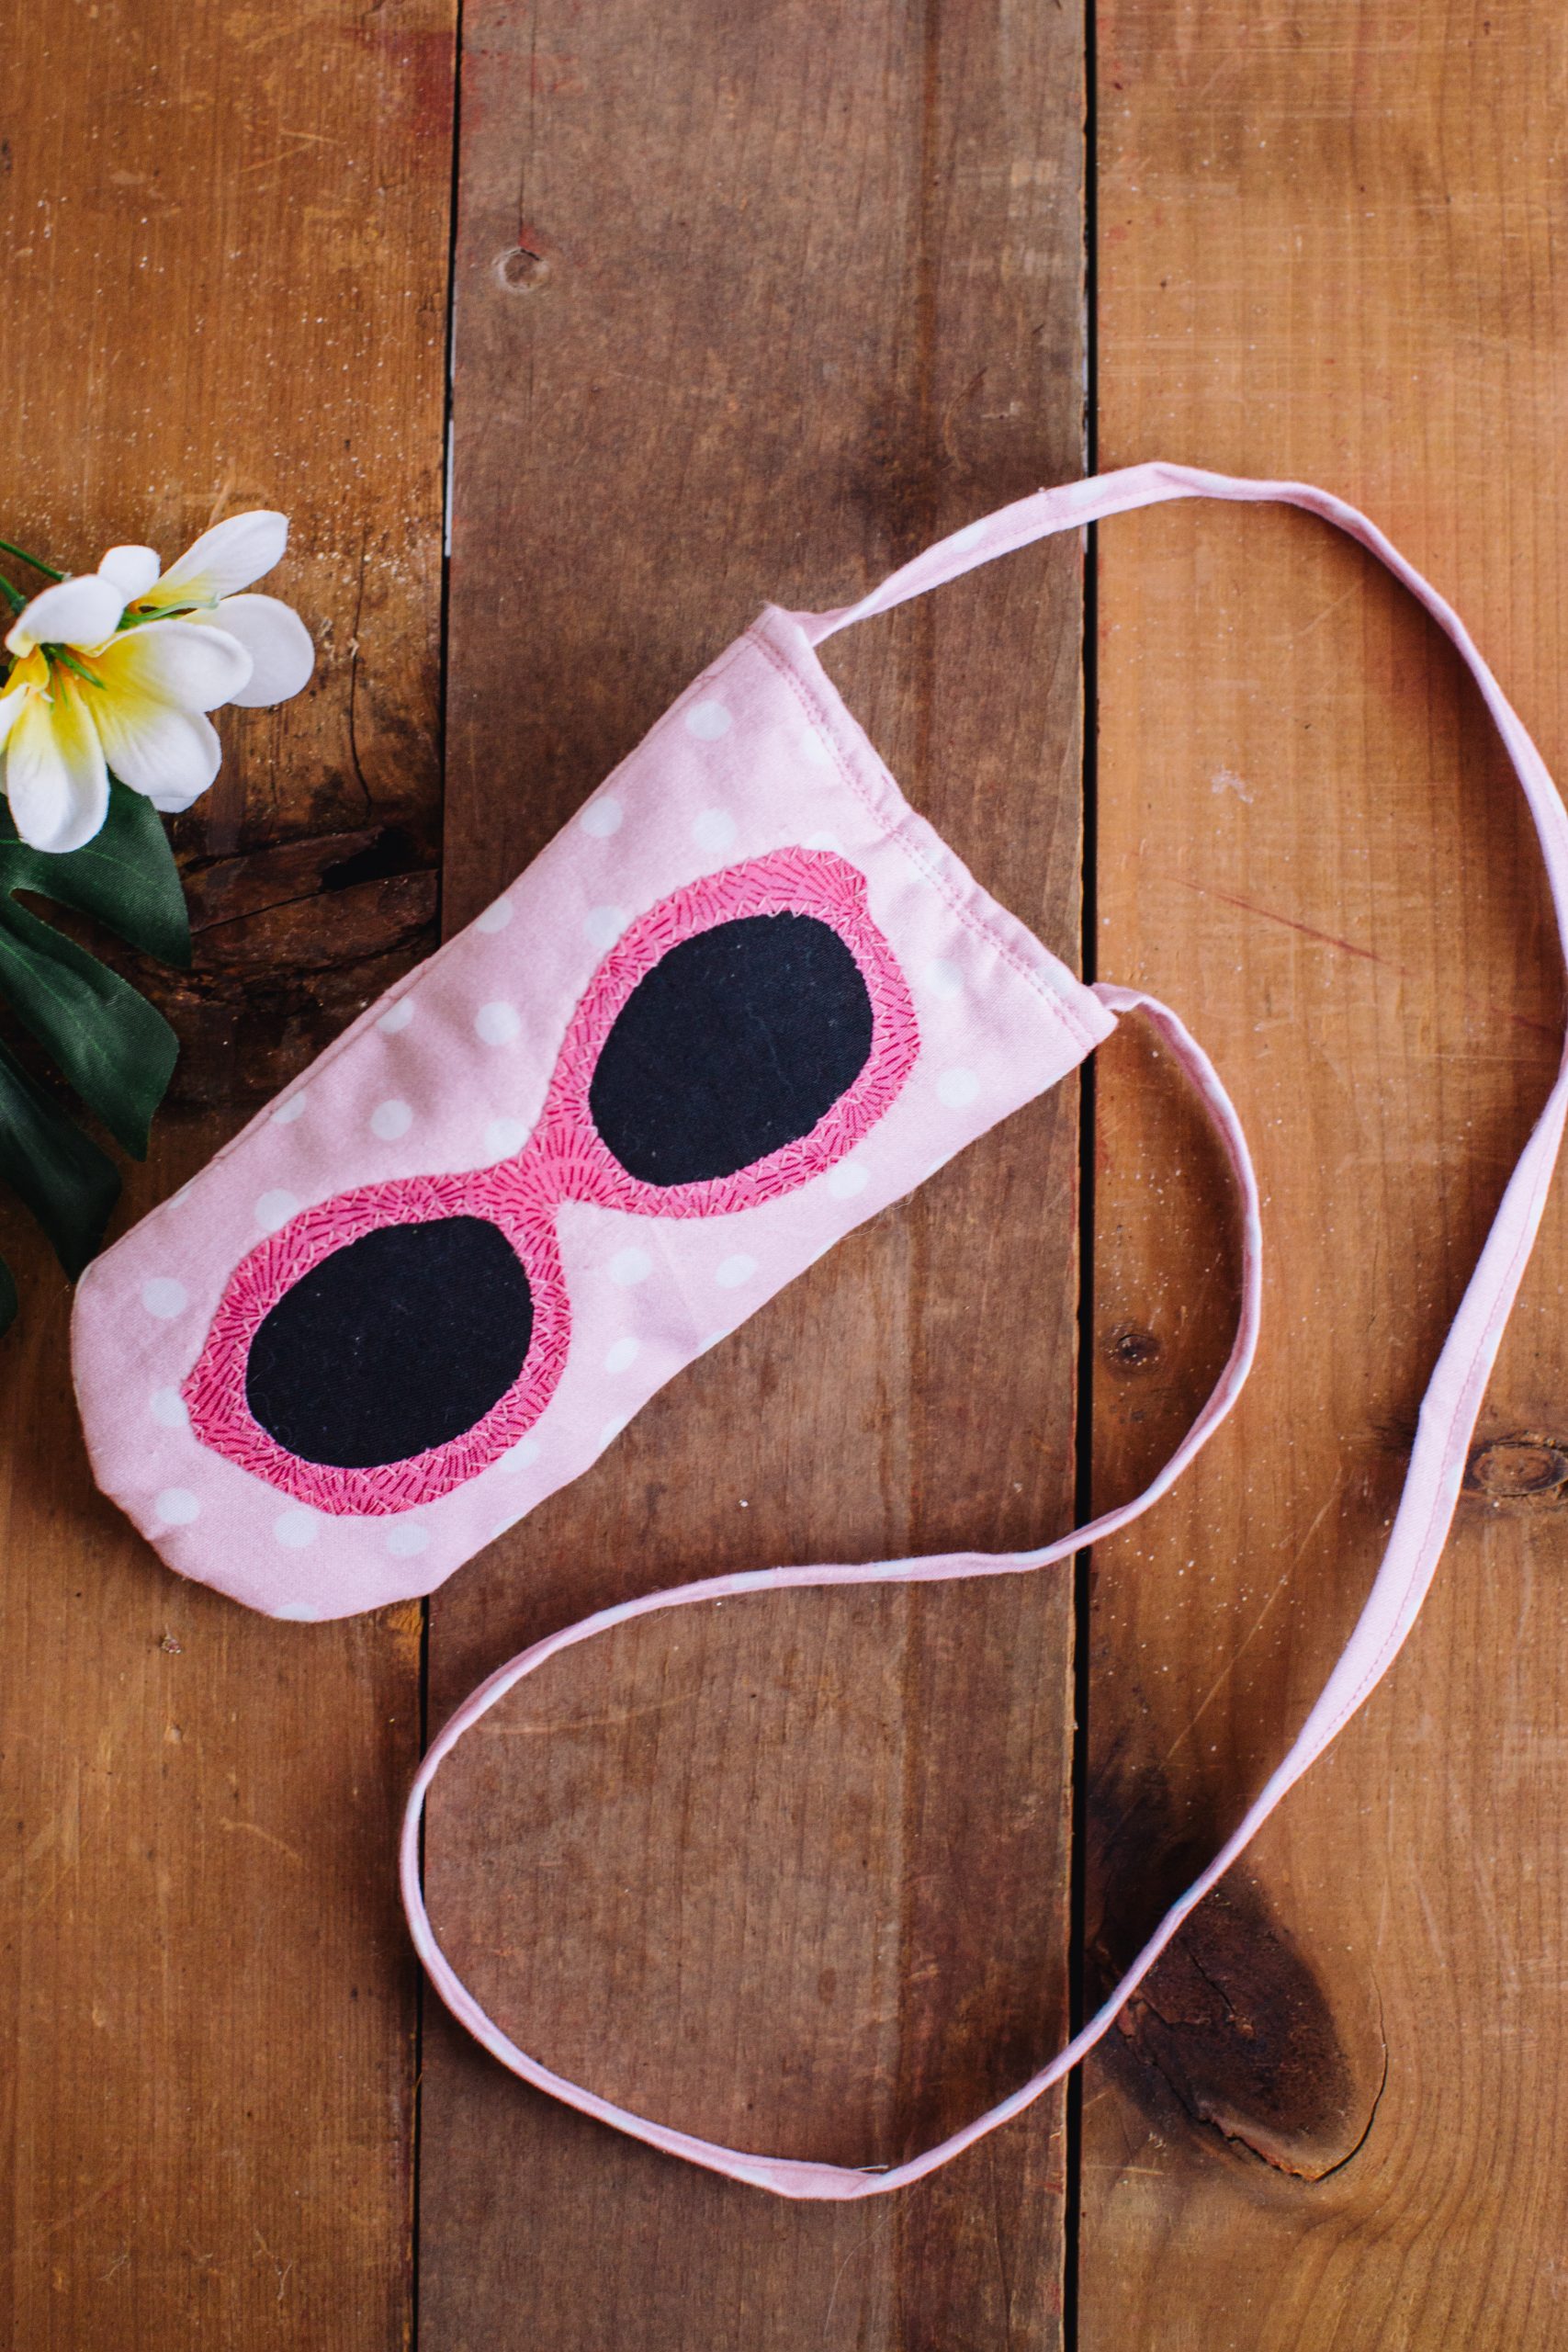 The All Eyes on You Sunglasses Case